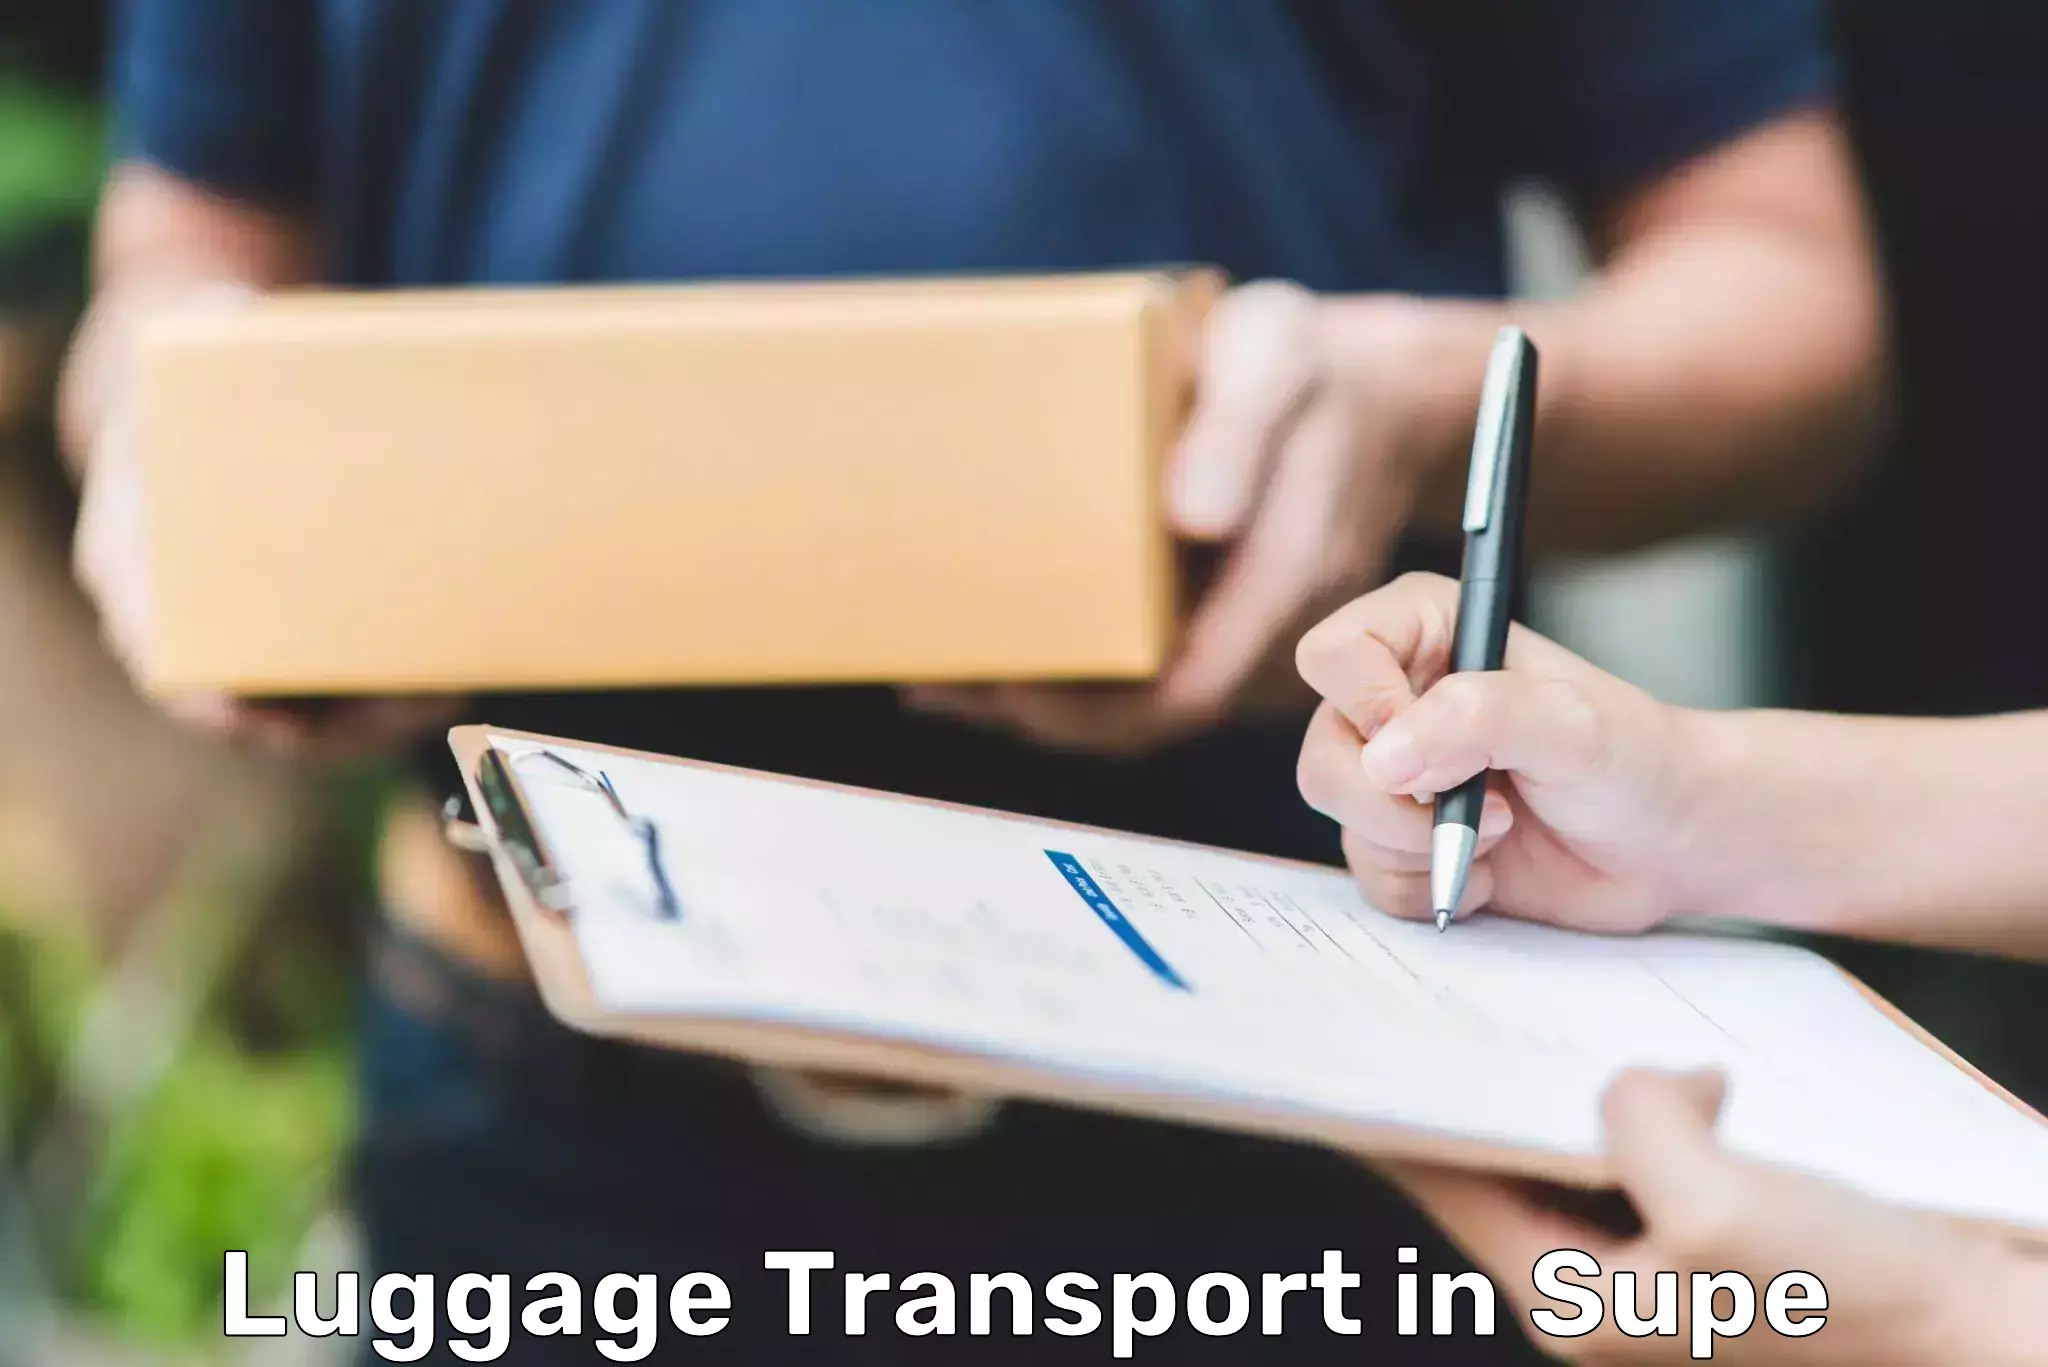 Tailored baggage transport in Supe